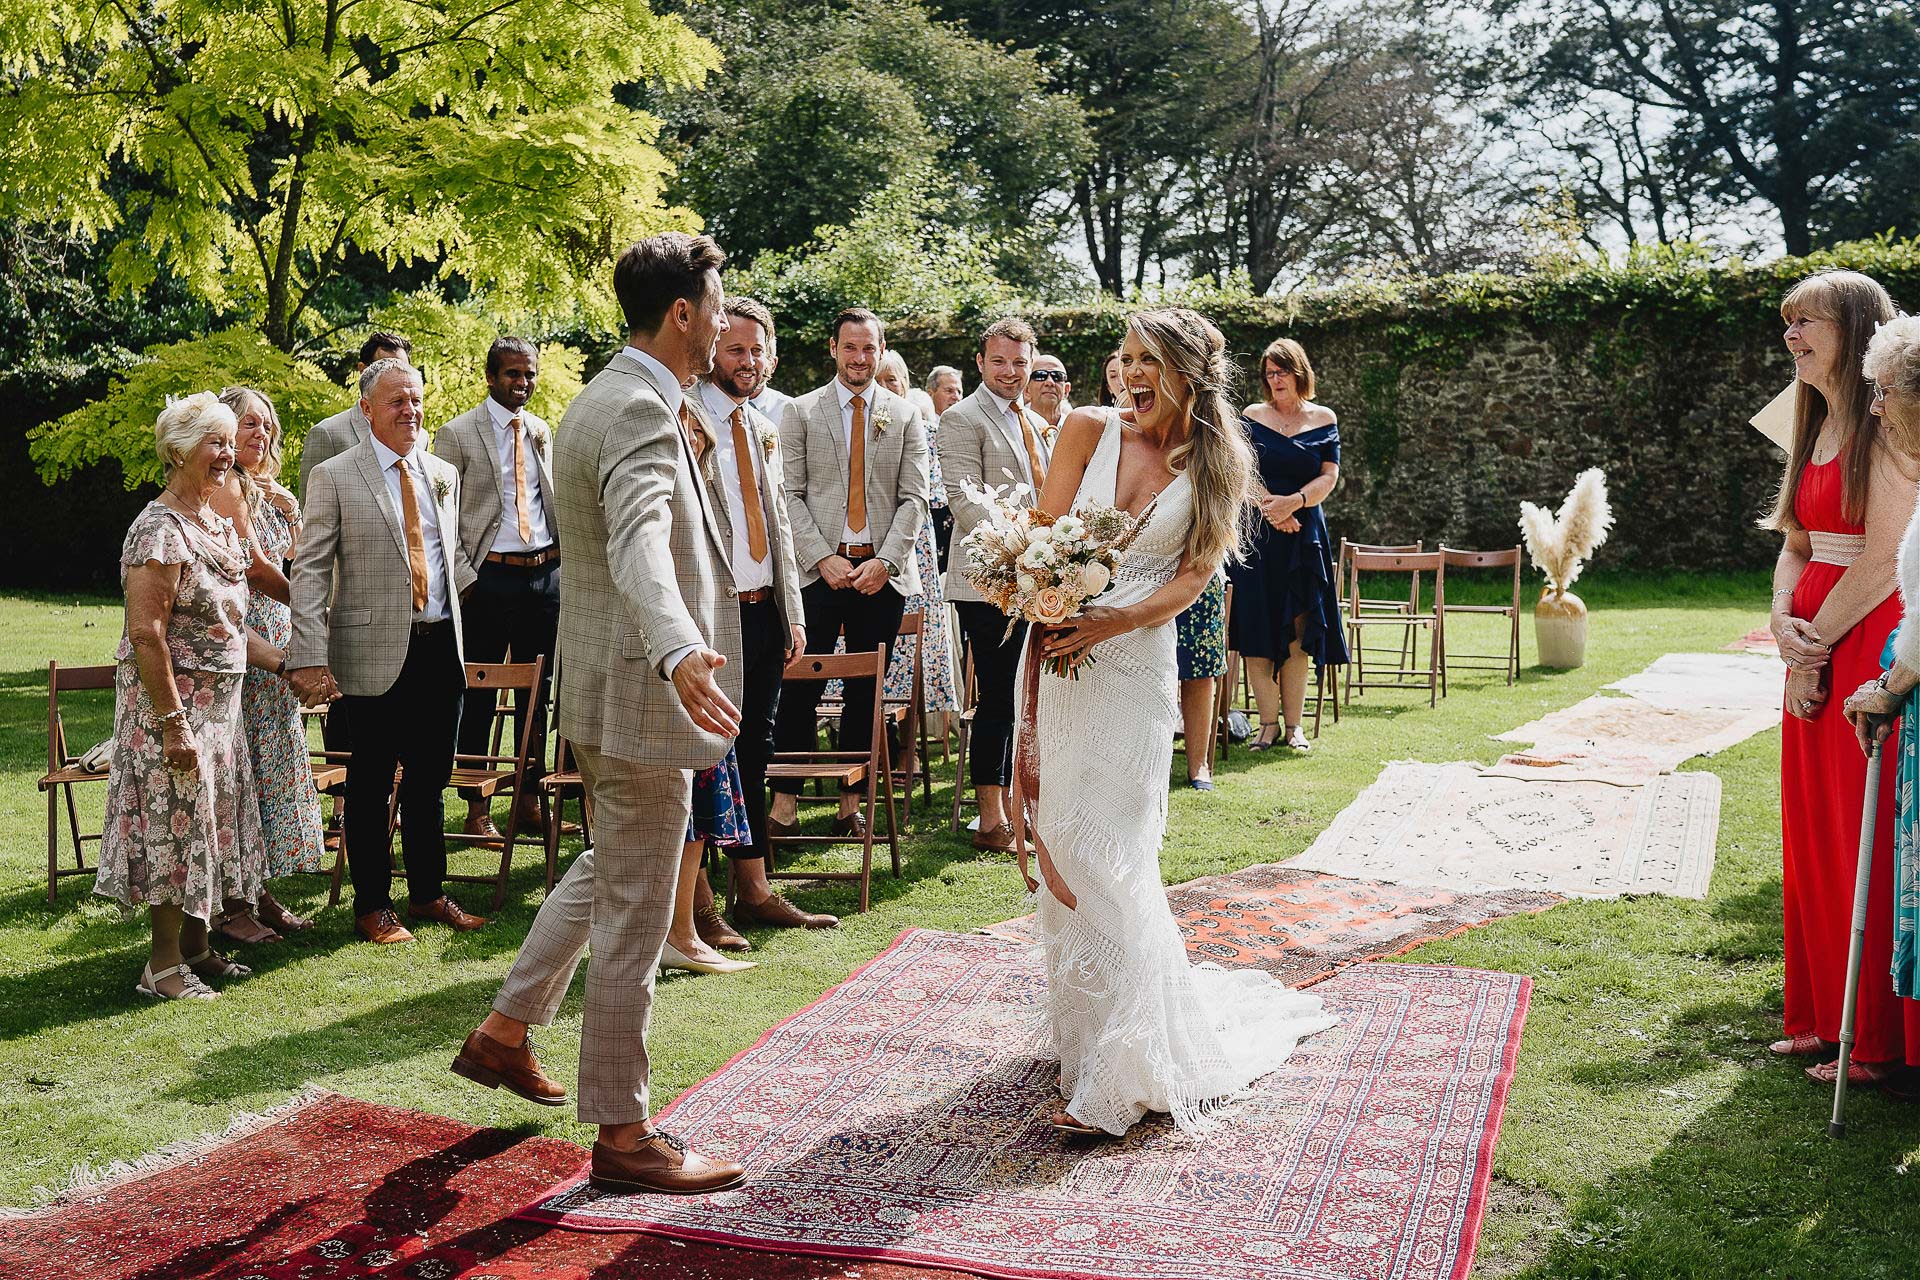 A boho bride and groom smiling at each other at their outdoor wedding ceremony in a walled garden in Devon